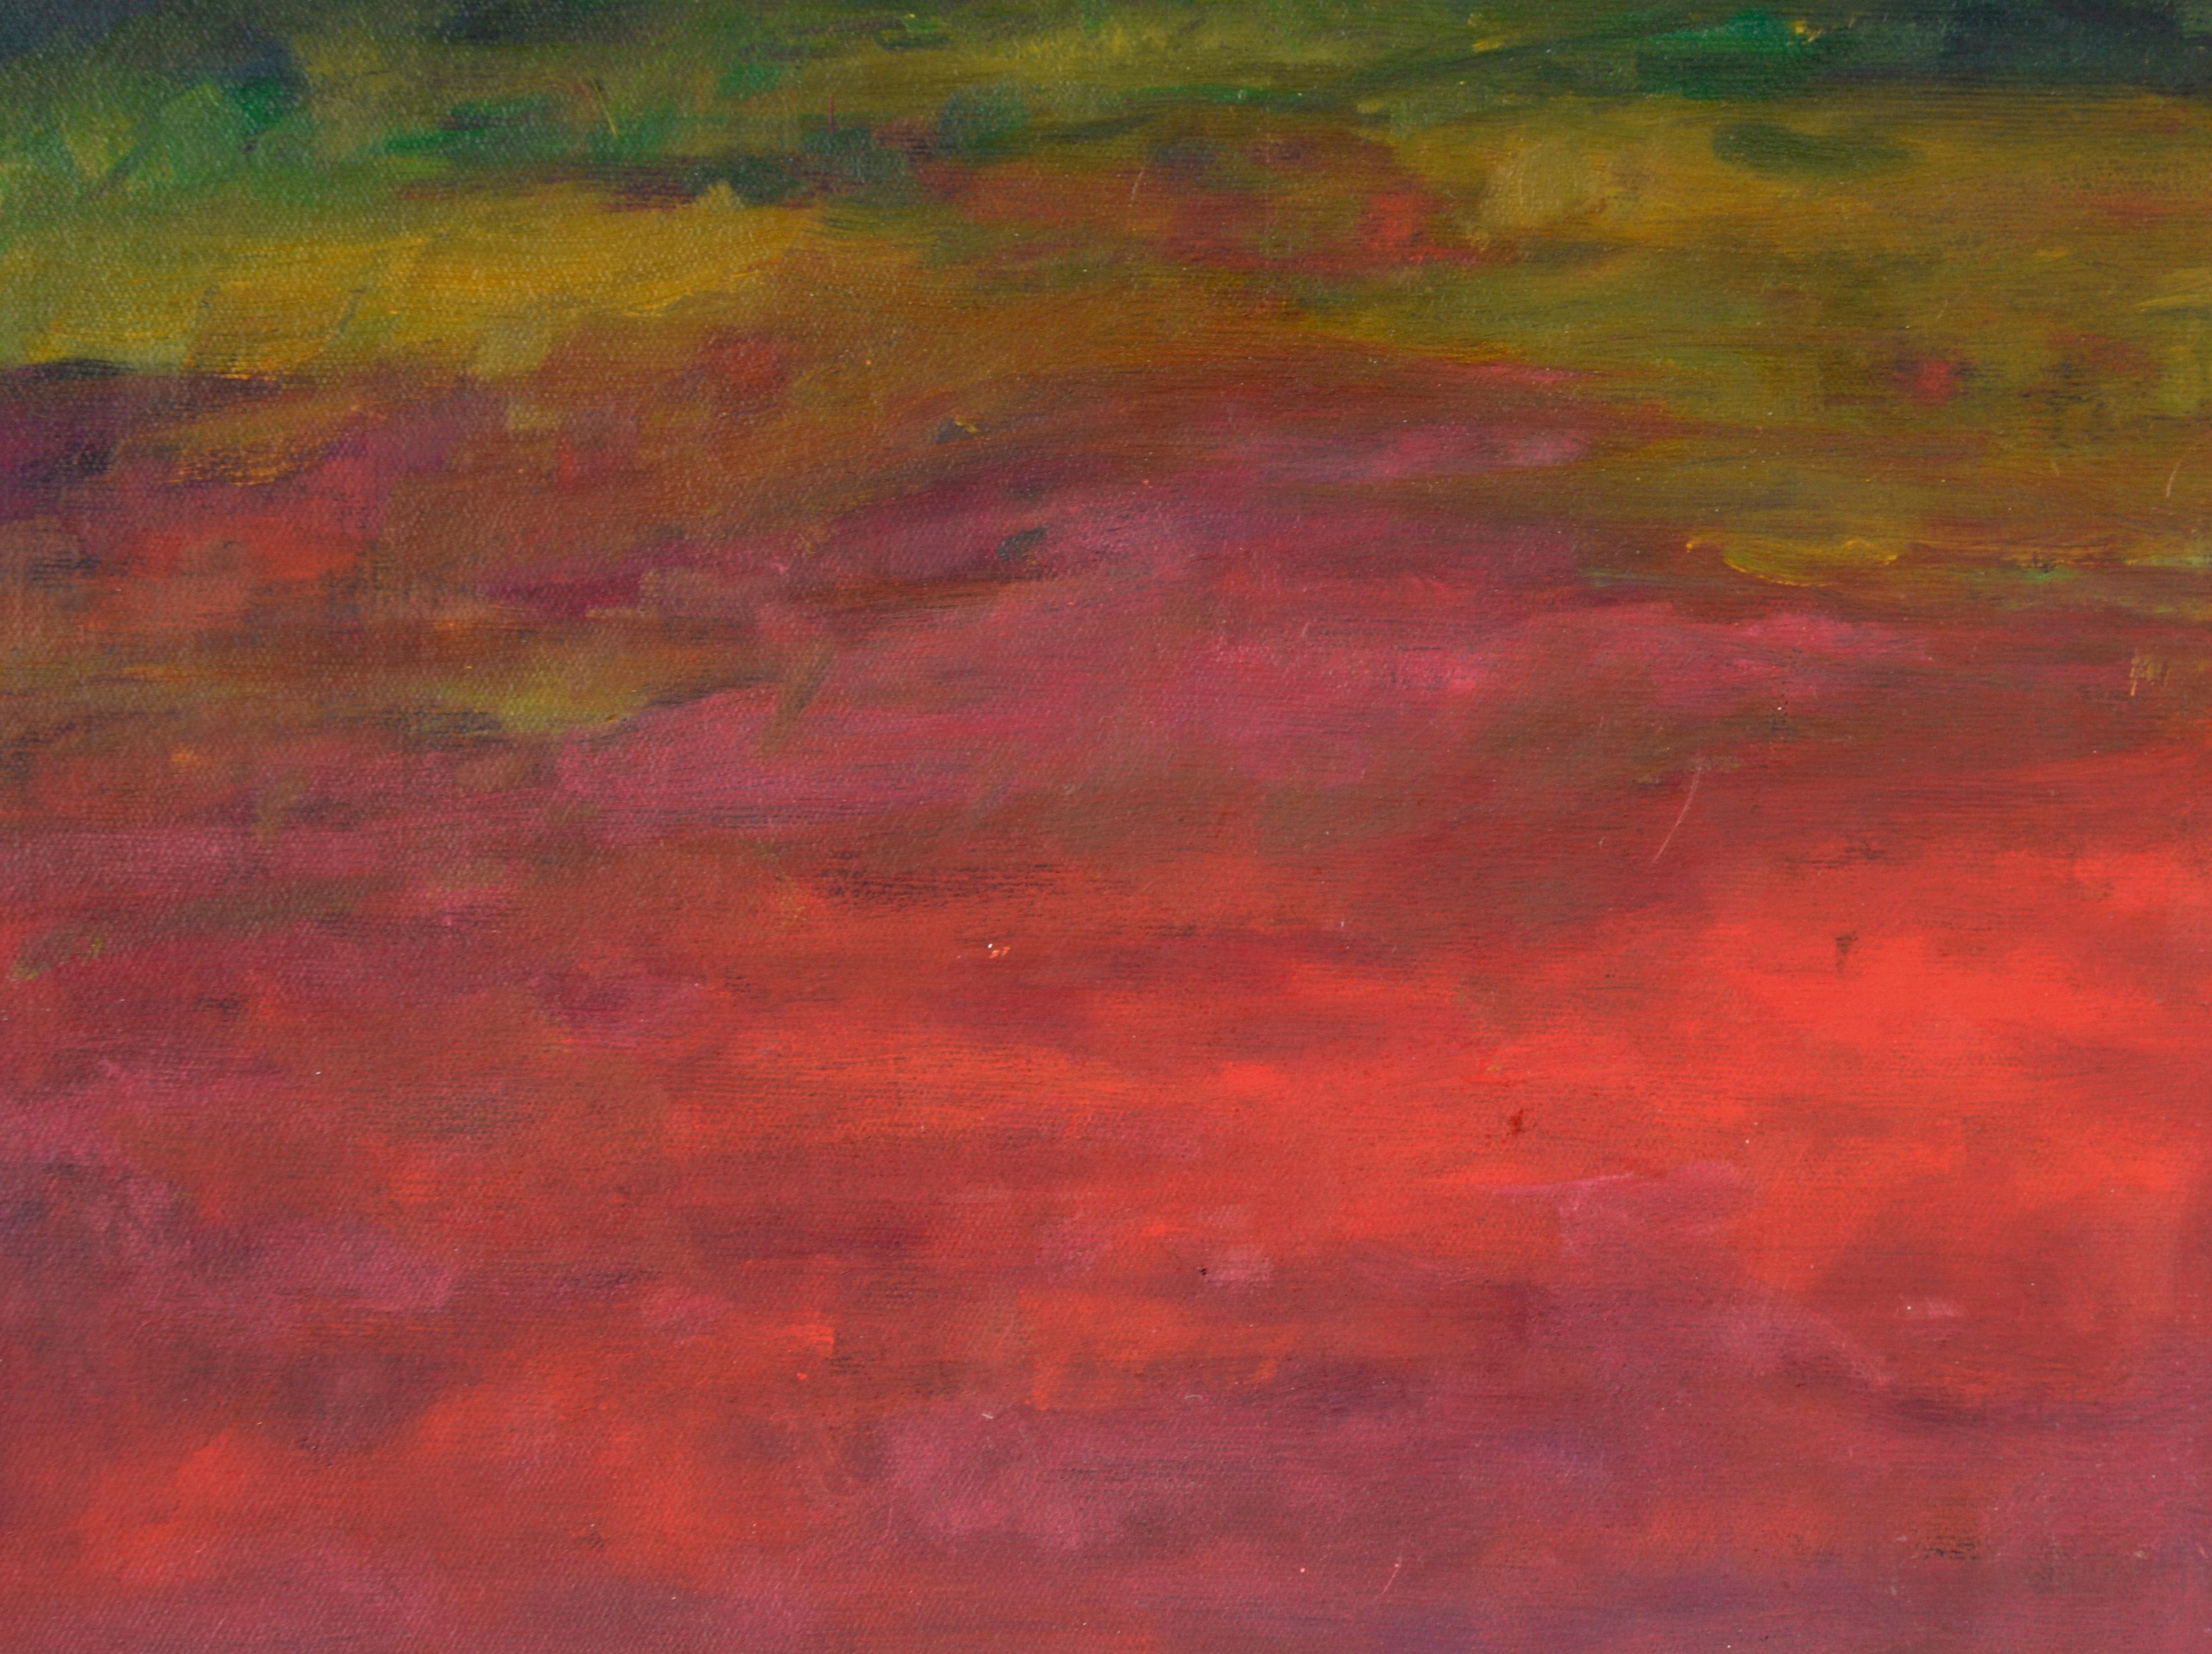 Glowing Red Sunset - abstracted Landscape in Acrylic on Canvas

Vibrant sunset by an unknown central California coast artist Maria Pavao Hadsell (Portugal/American). A glowing red sky is reflected in the foreground of this piece, implying a marsh or